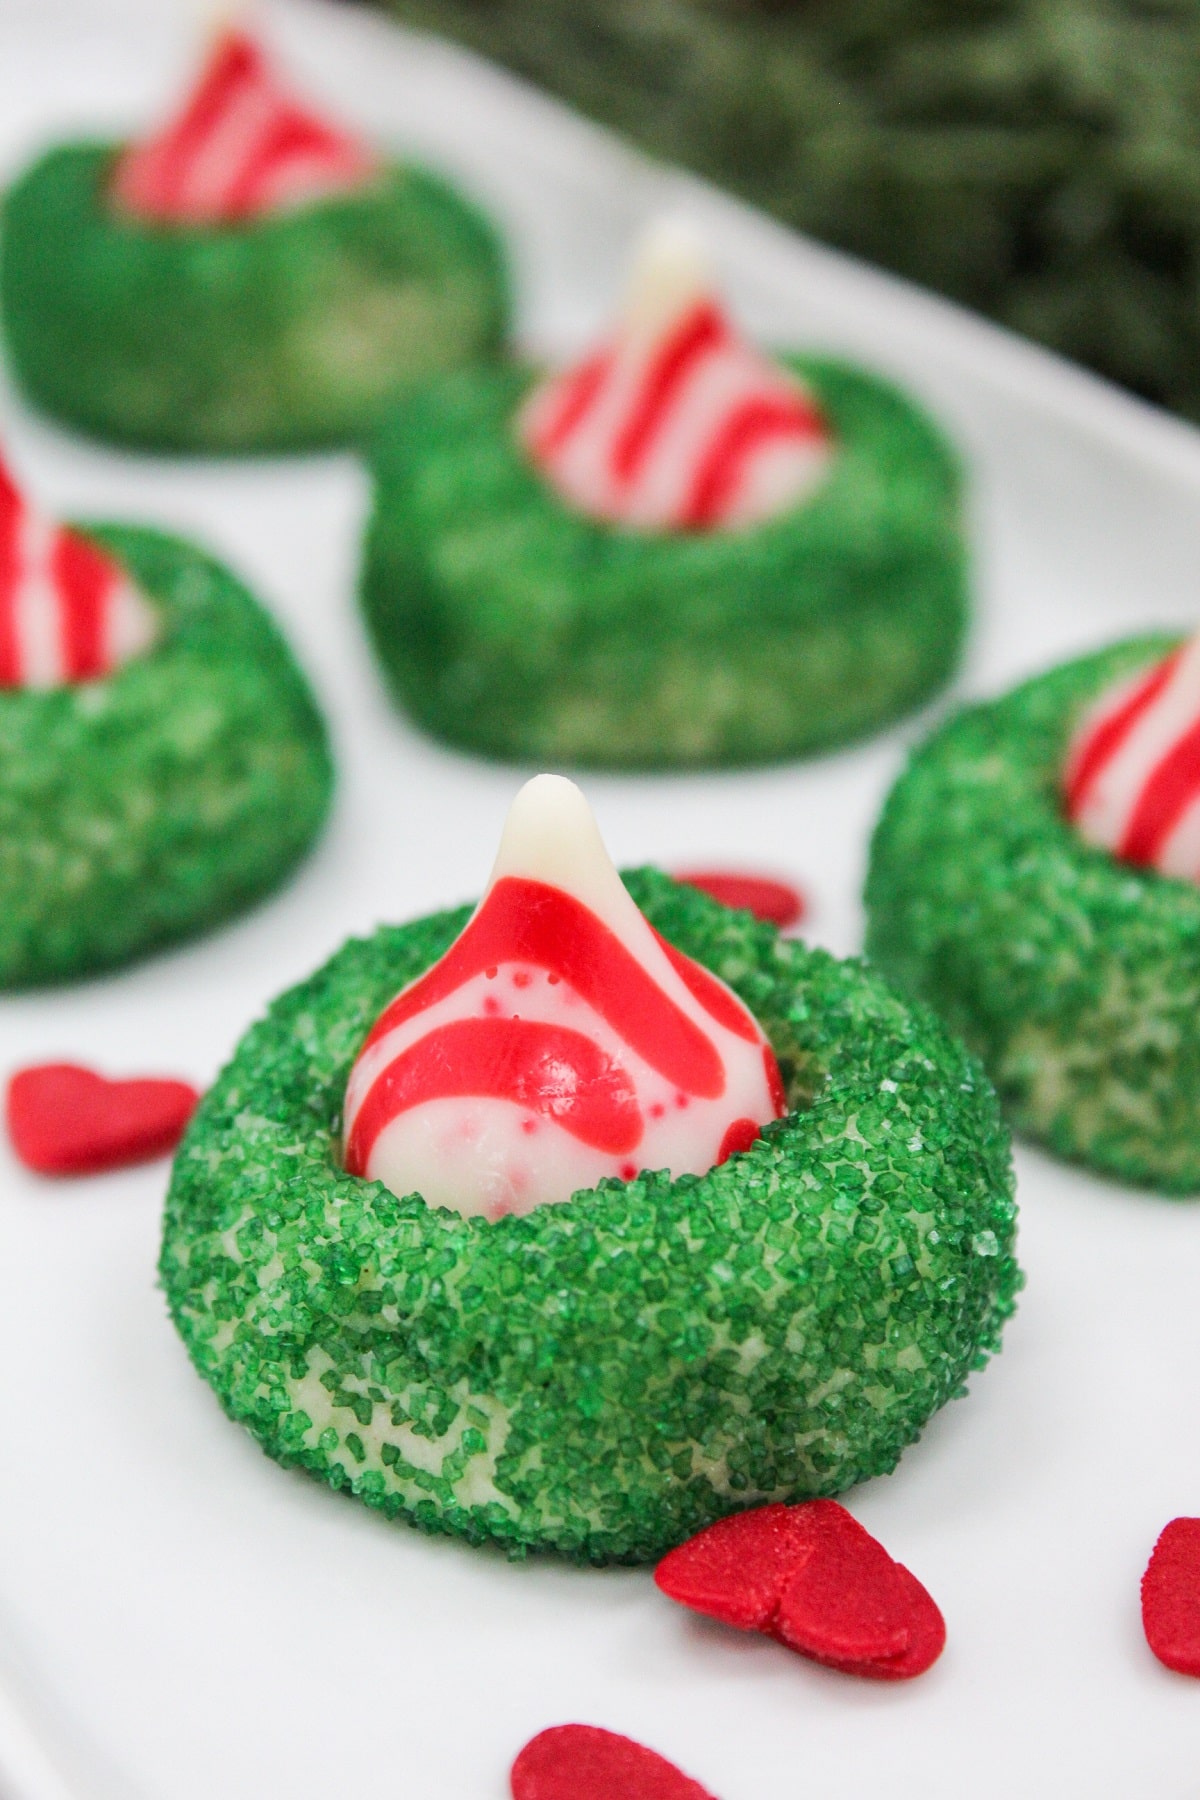 sugar cookies with small green sprinkles. A red and white kiss candy is placed in the middle. Cookies are served on a white plate.